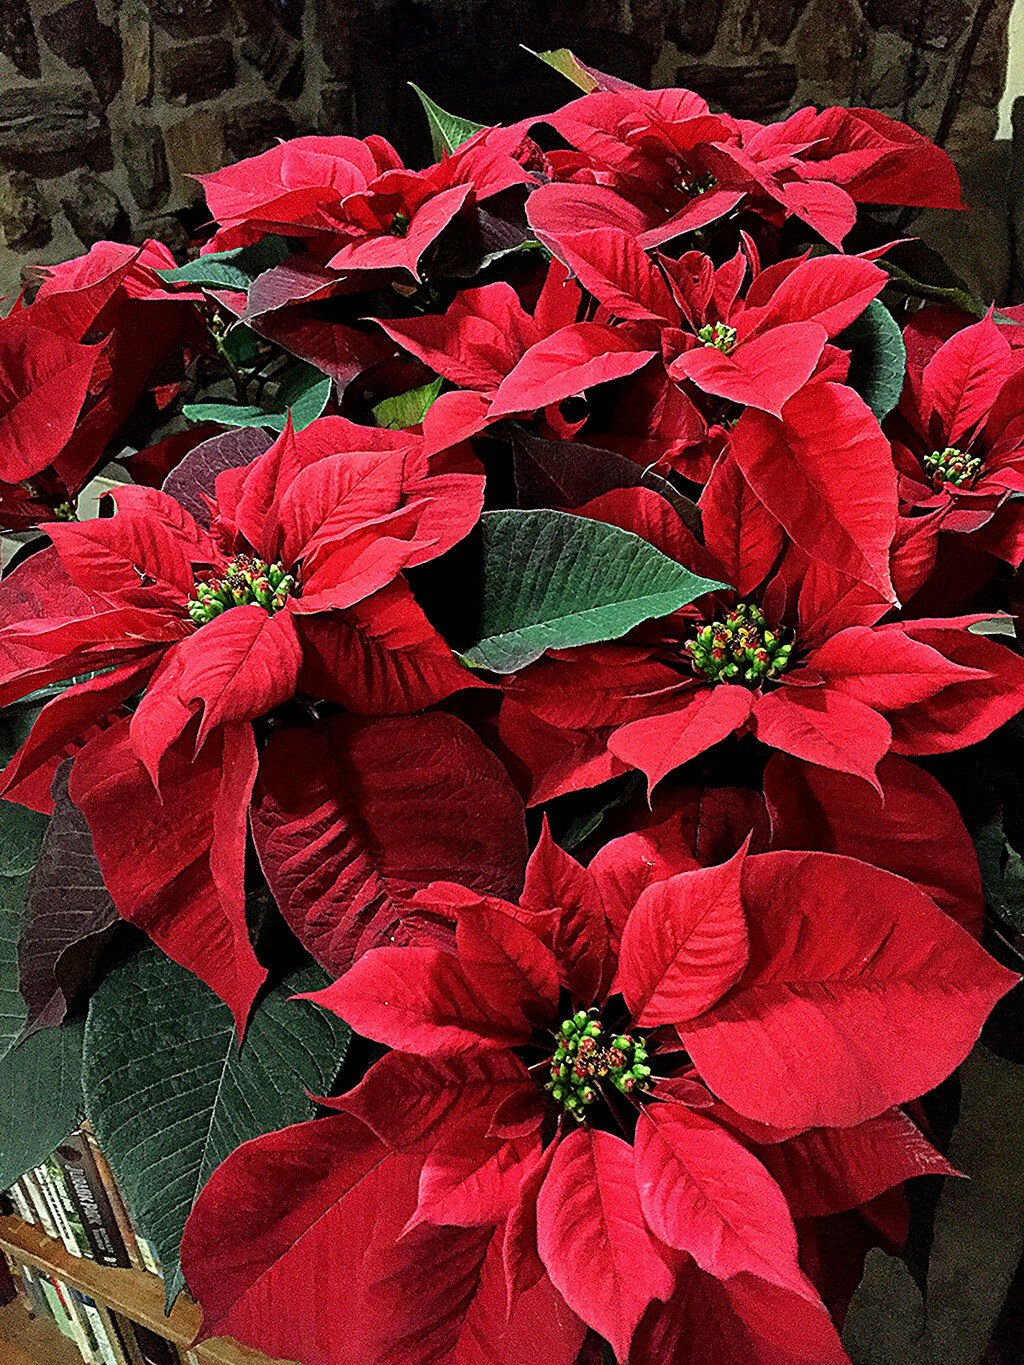 Cali O'Hare file photo.
Cultivated by the Aztecs of Mexico, the poinsettia was introduced in the United States in 1925 by Joel Poinsett, who discovered it while serving as U.S. ambassador to Mexico. Native poinsettias will grow 10 to 12 feet high.